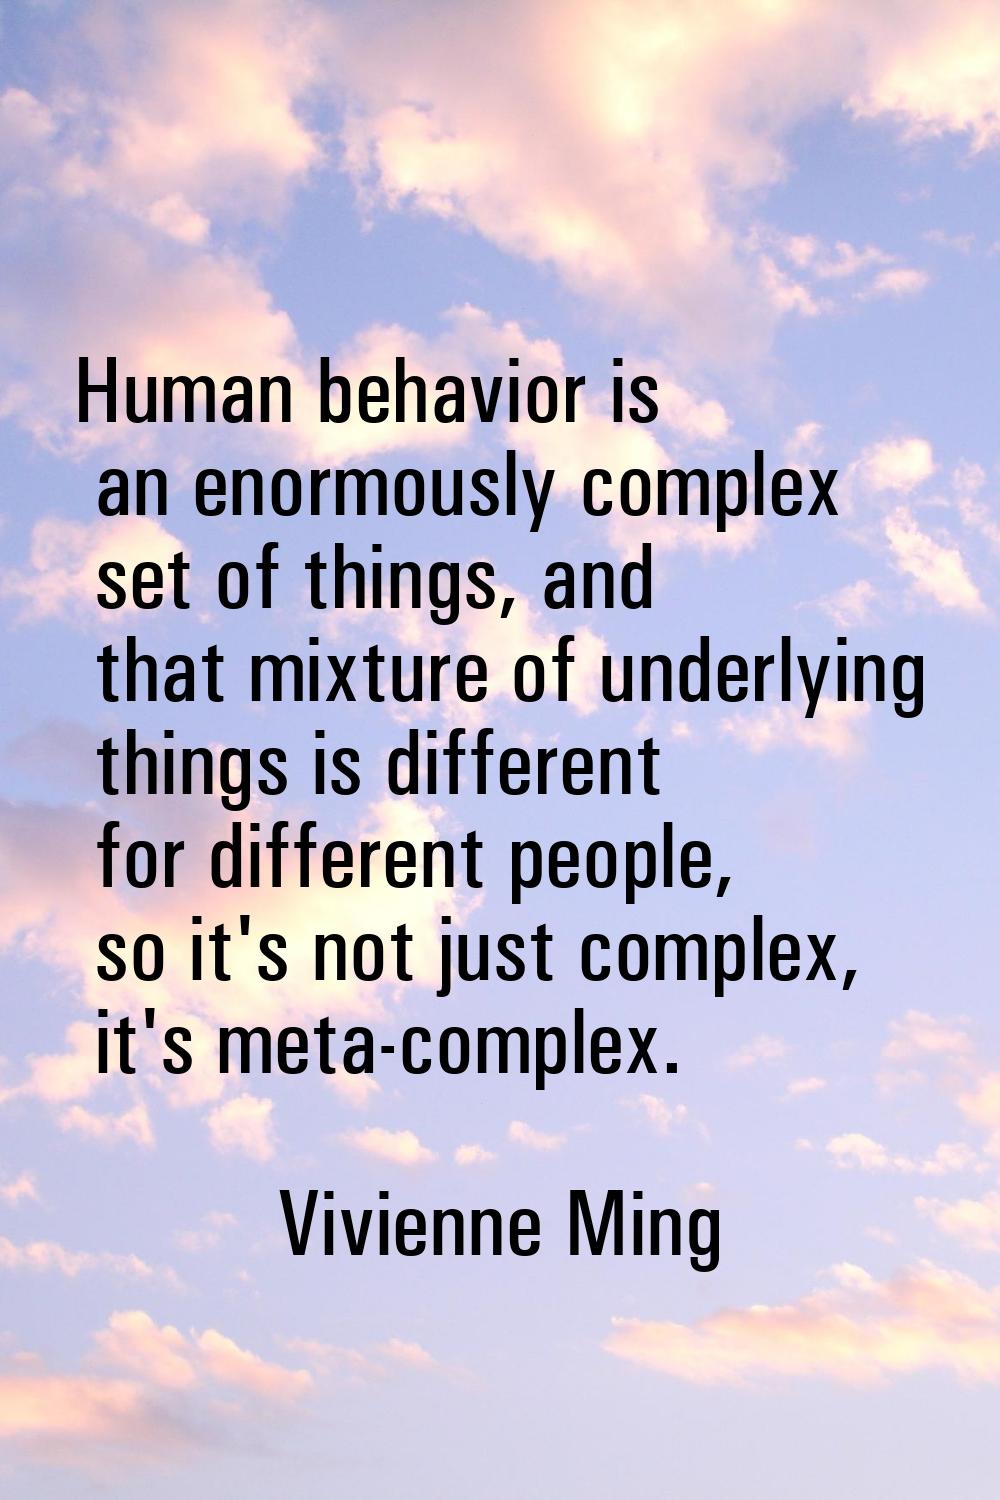 Human behavior is an enormously complex set of things, and that mixture of underlying things is dif